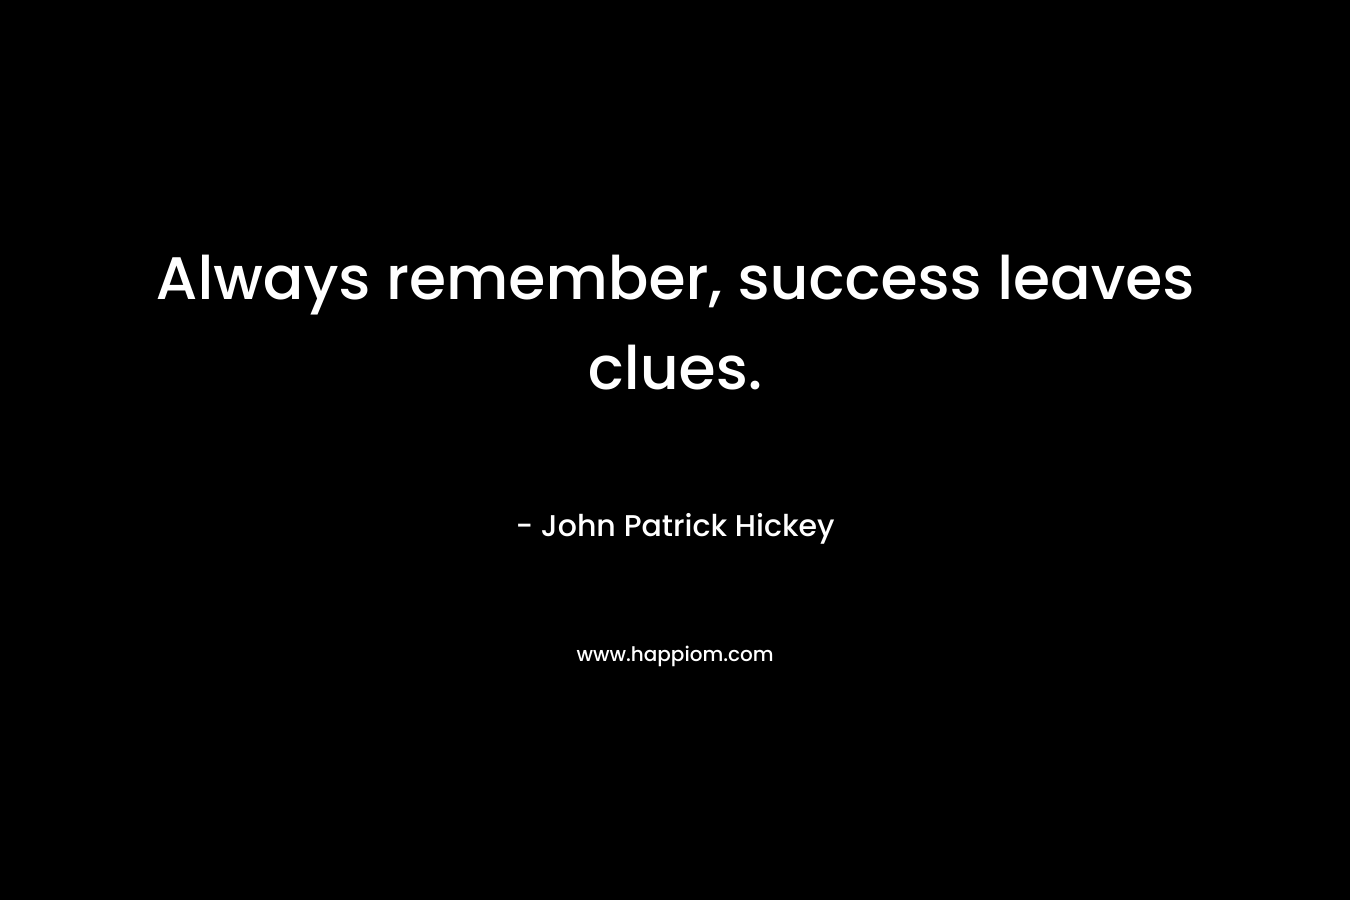 Always remember, success leaves clues.